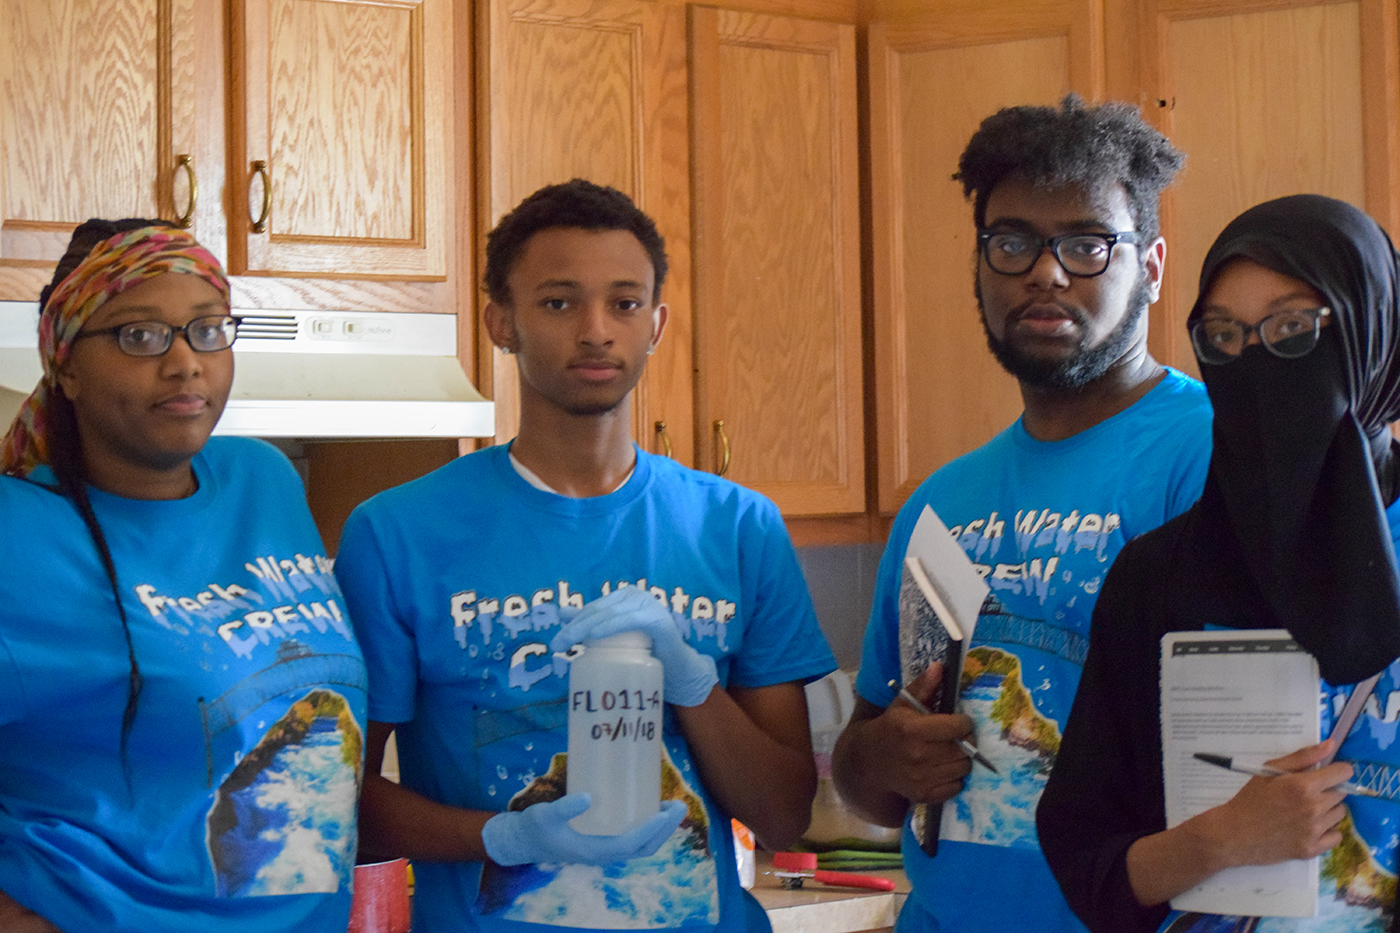 A group of four young people wearing matching Fresh Water Crew tshirts stand in a kitchen holding input forms and a water testing bottle.